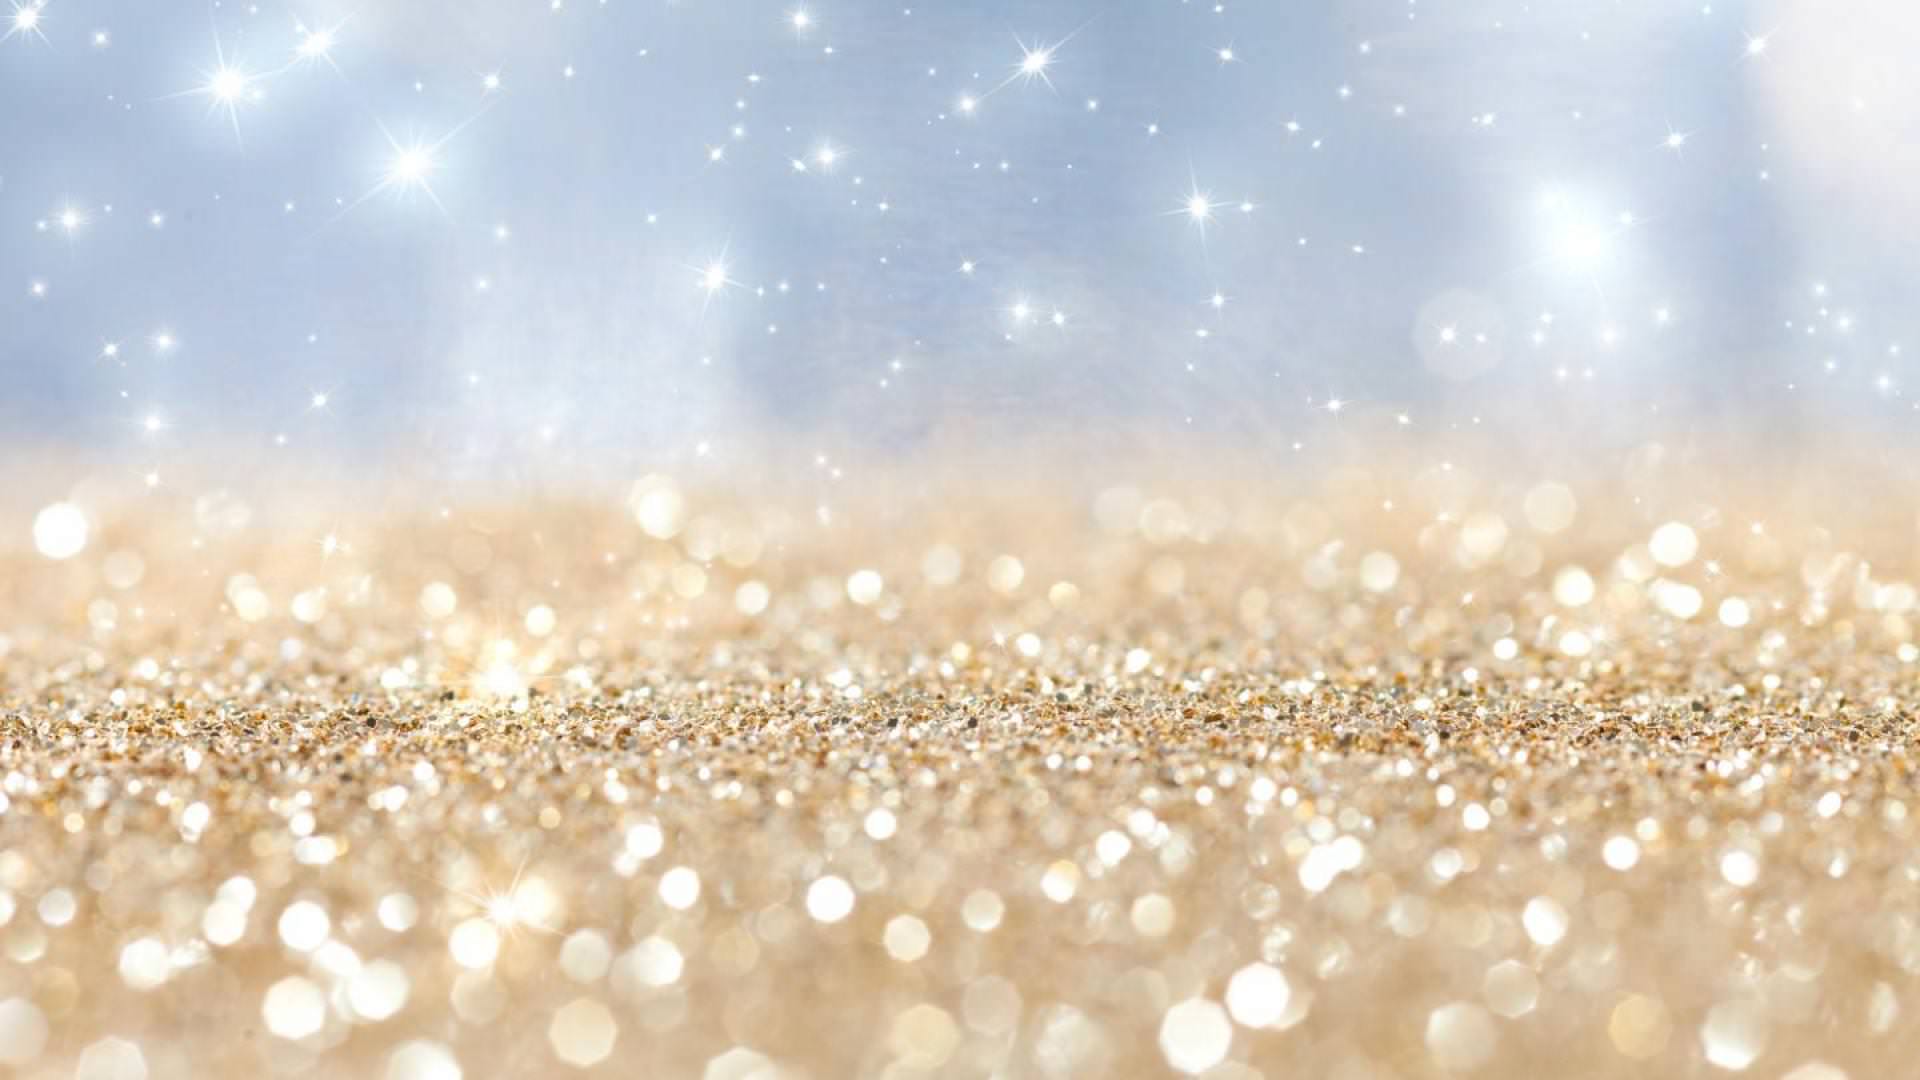 15+ White Glitter Backgrounds | Wallpapers | FreeCreatives